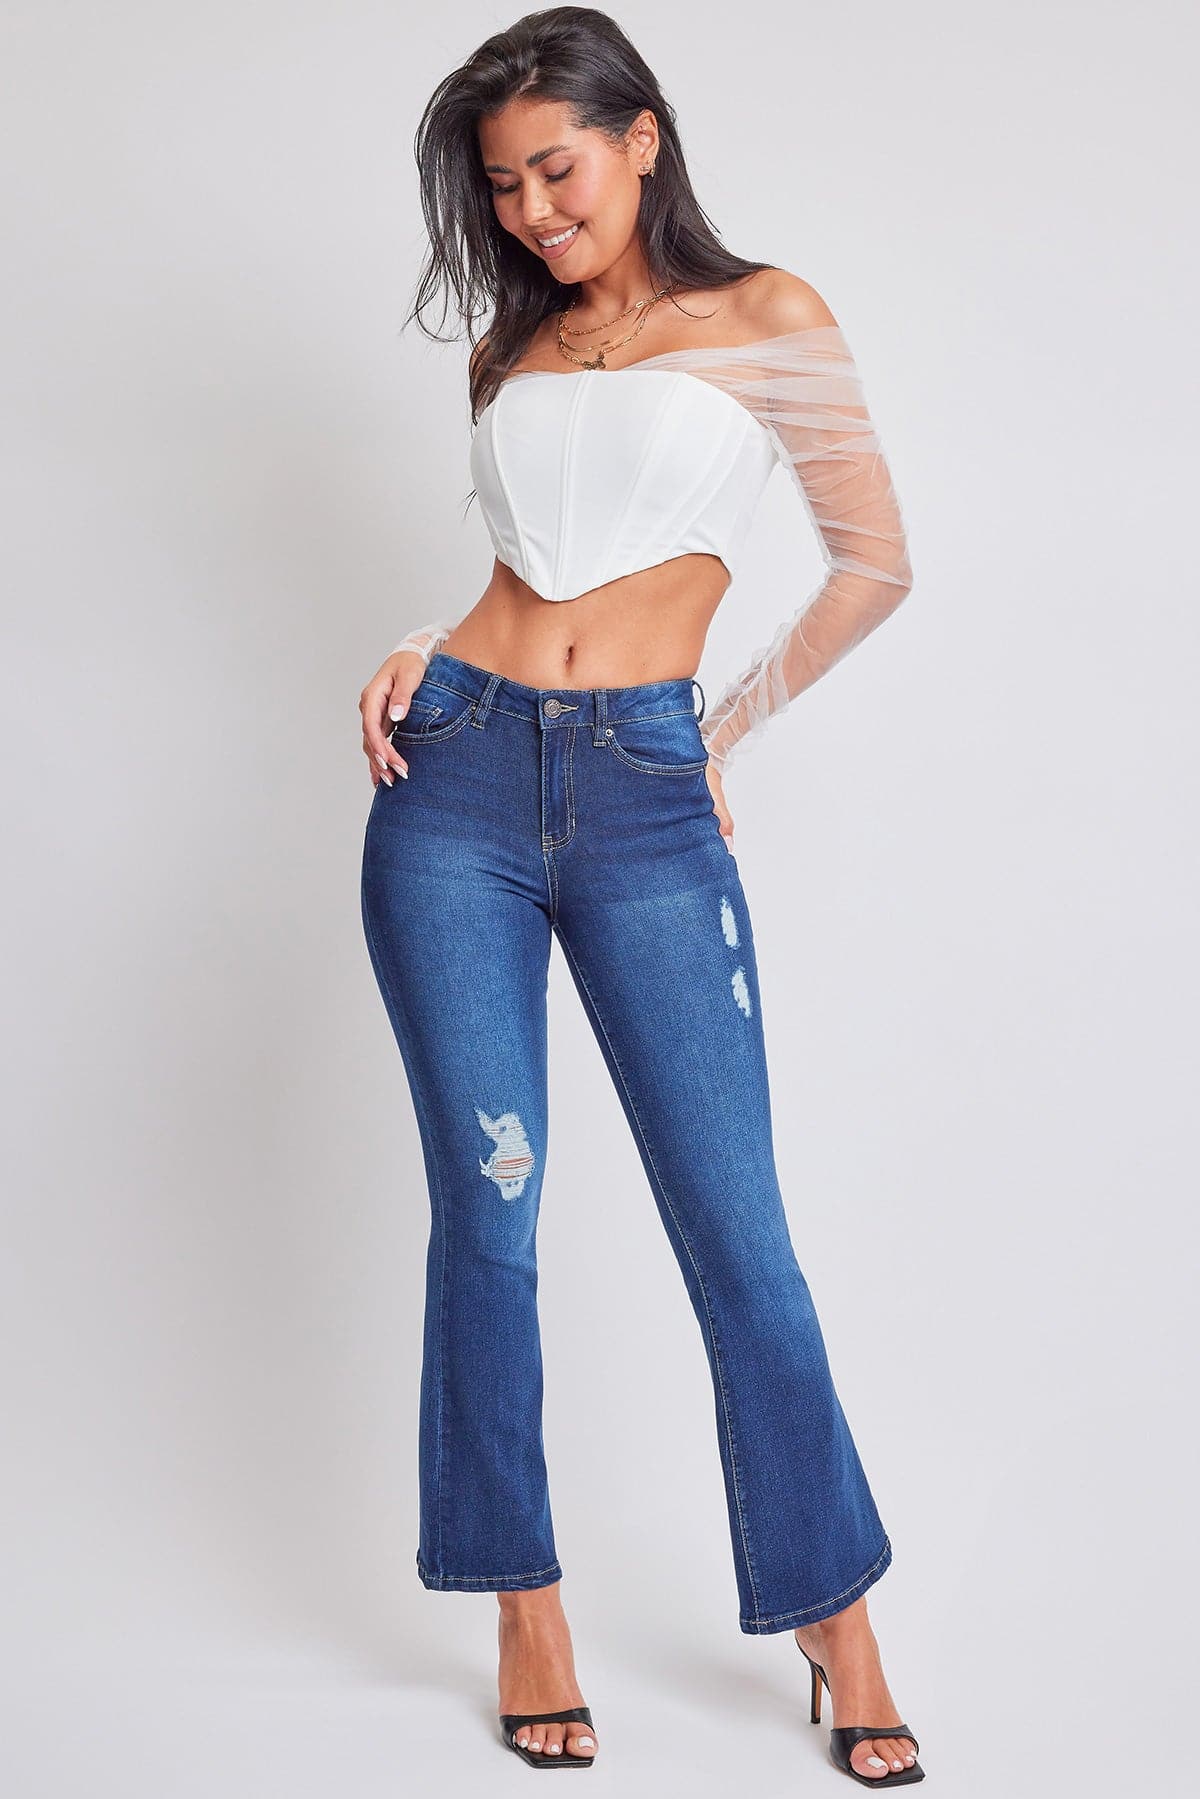 Women's Essential Distressed Flare Jeans